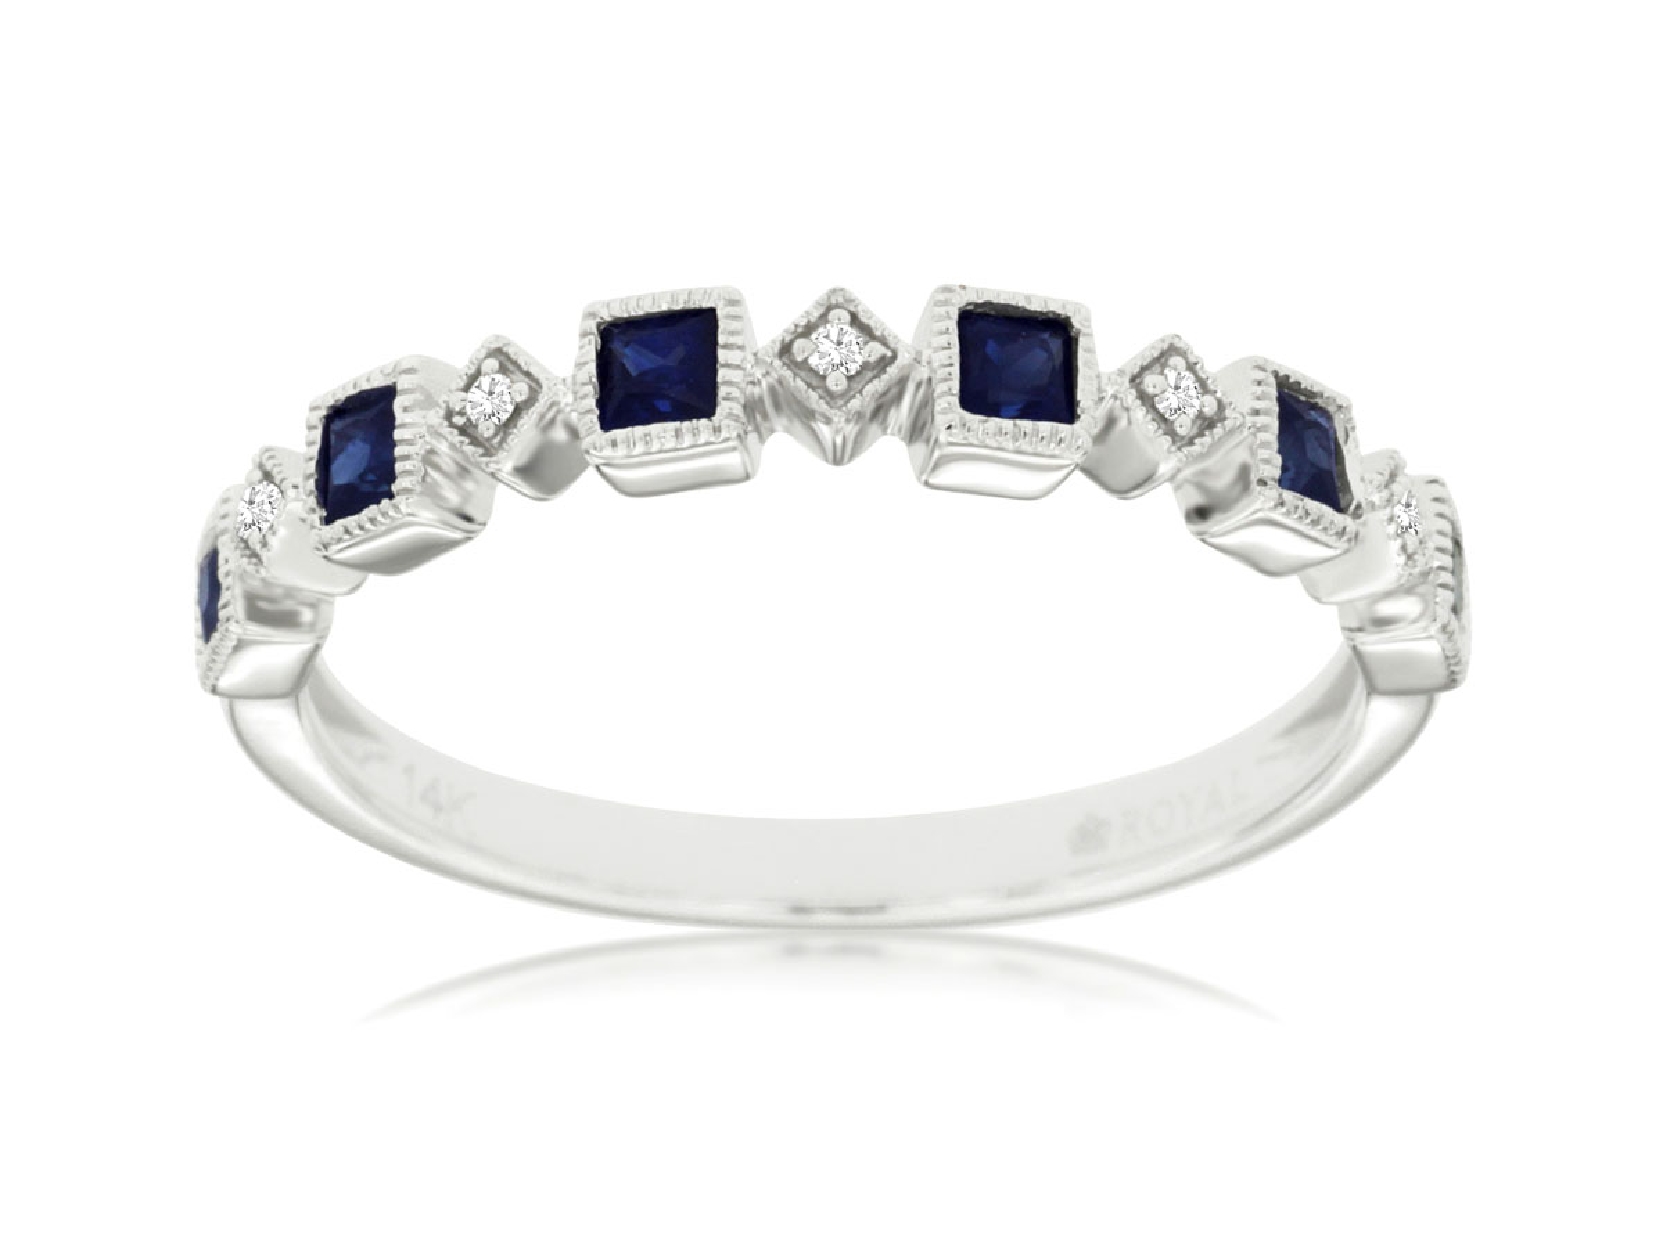 14K White Gold Princess Cut Sapphire Stackable Band with Diamond Accents Size 7 .02CT Diamonds .4CT Sapphires 
WC8652S